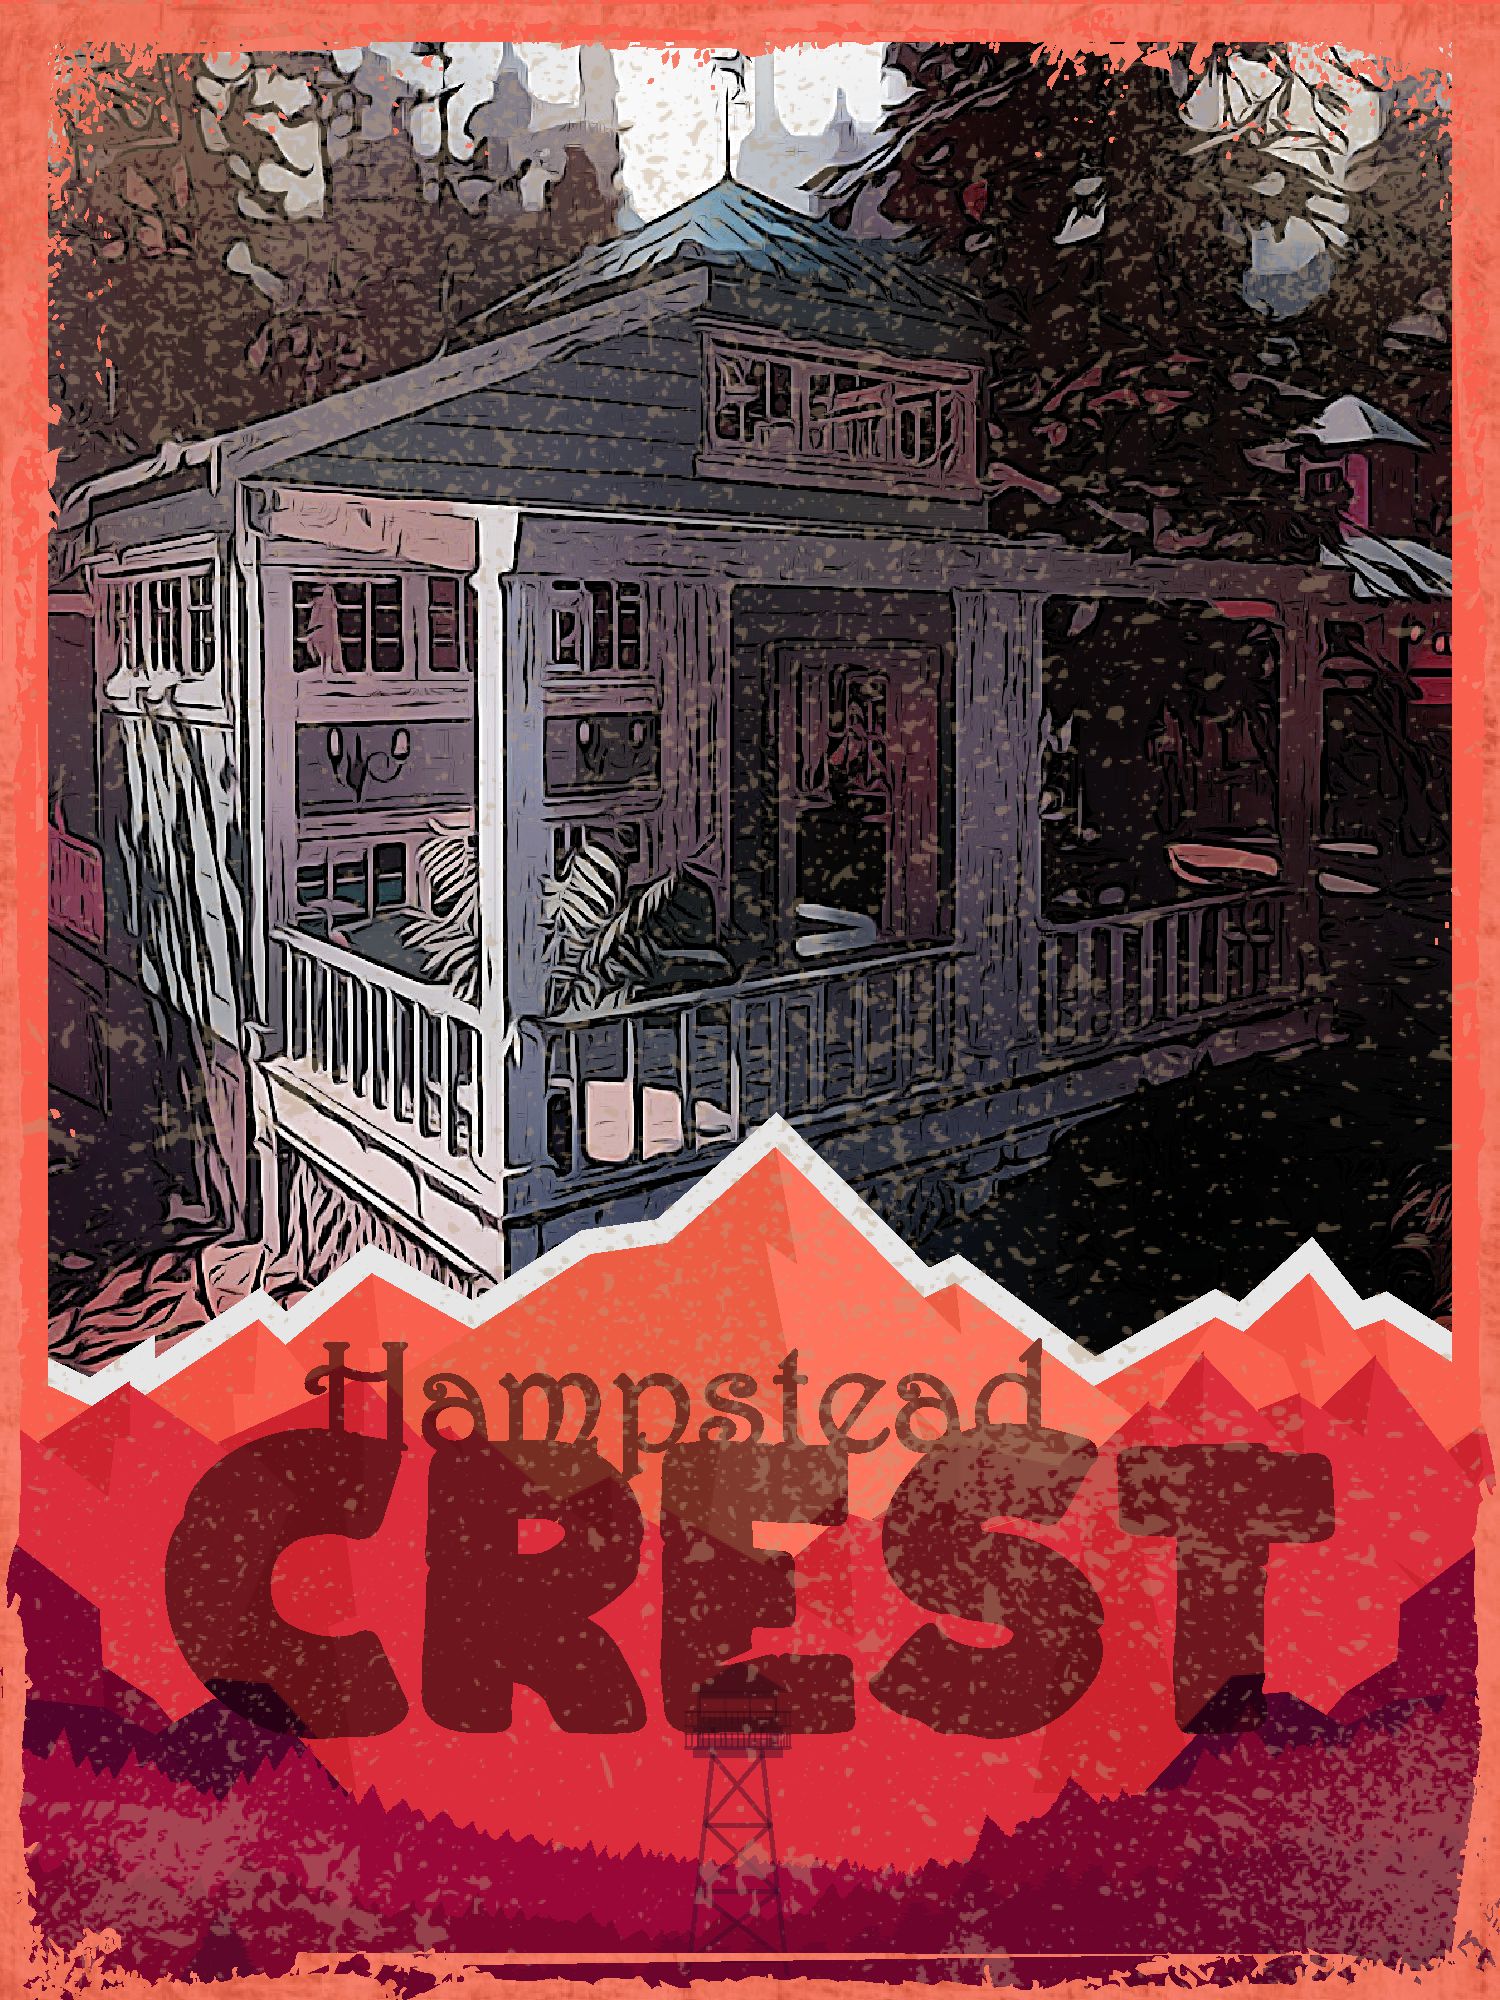 Hampstead Crest poster for Fallout 76 camp build.